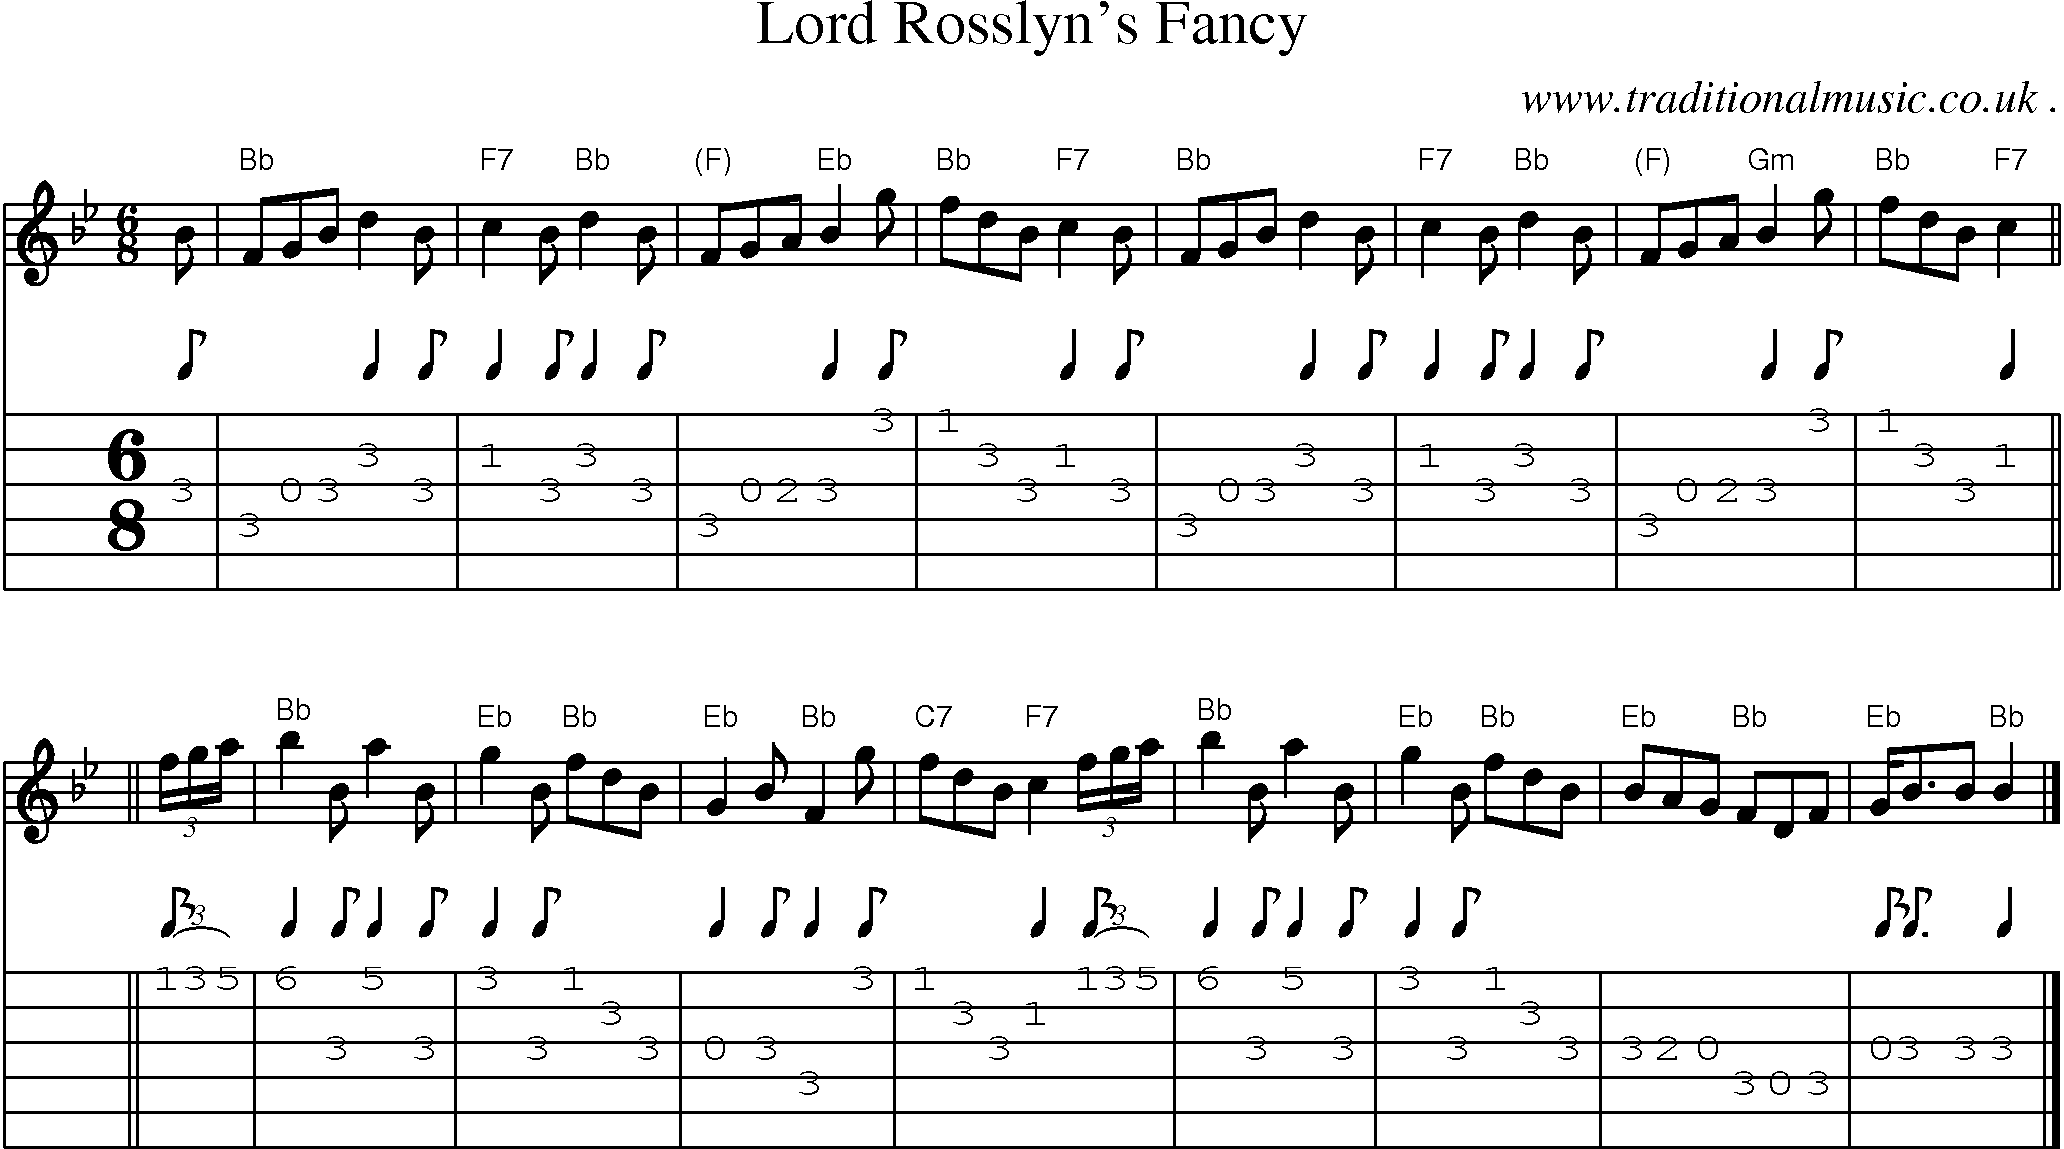 Sheet-music  score, Chords and Guitar Tabs for Lord Rosslyns Fancy